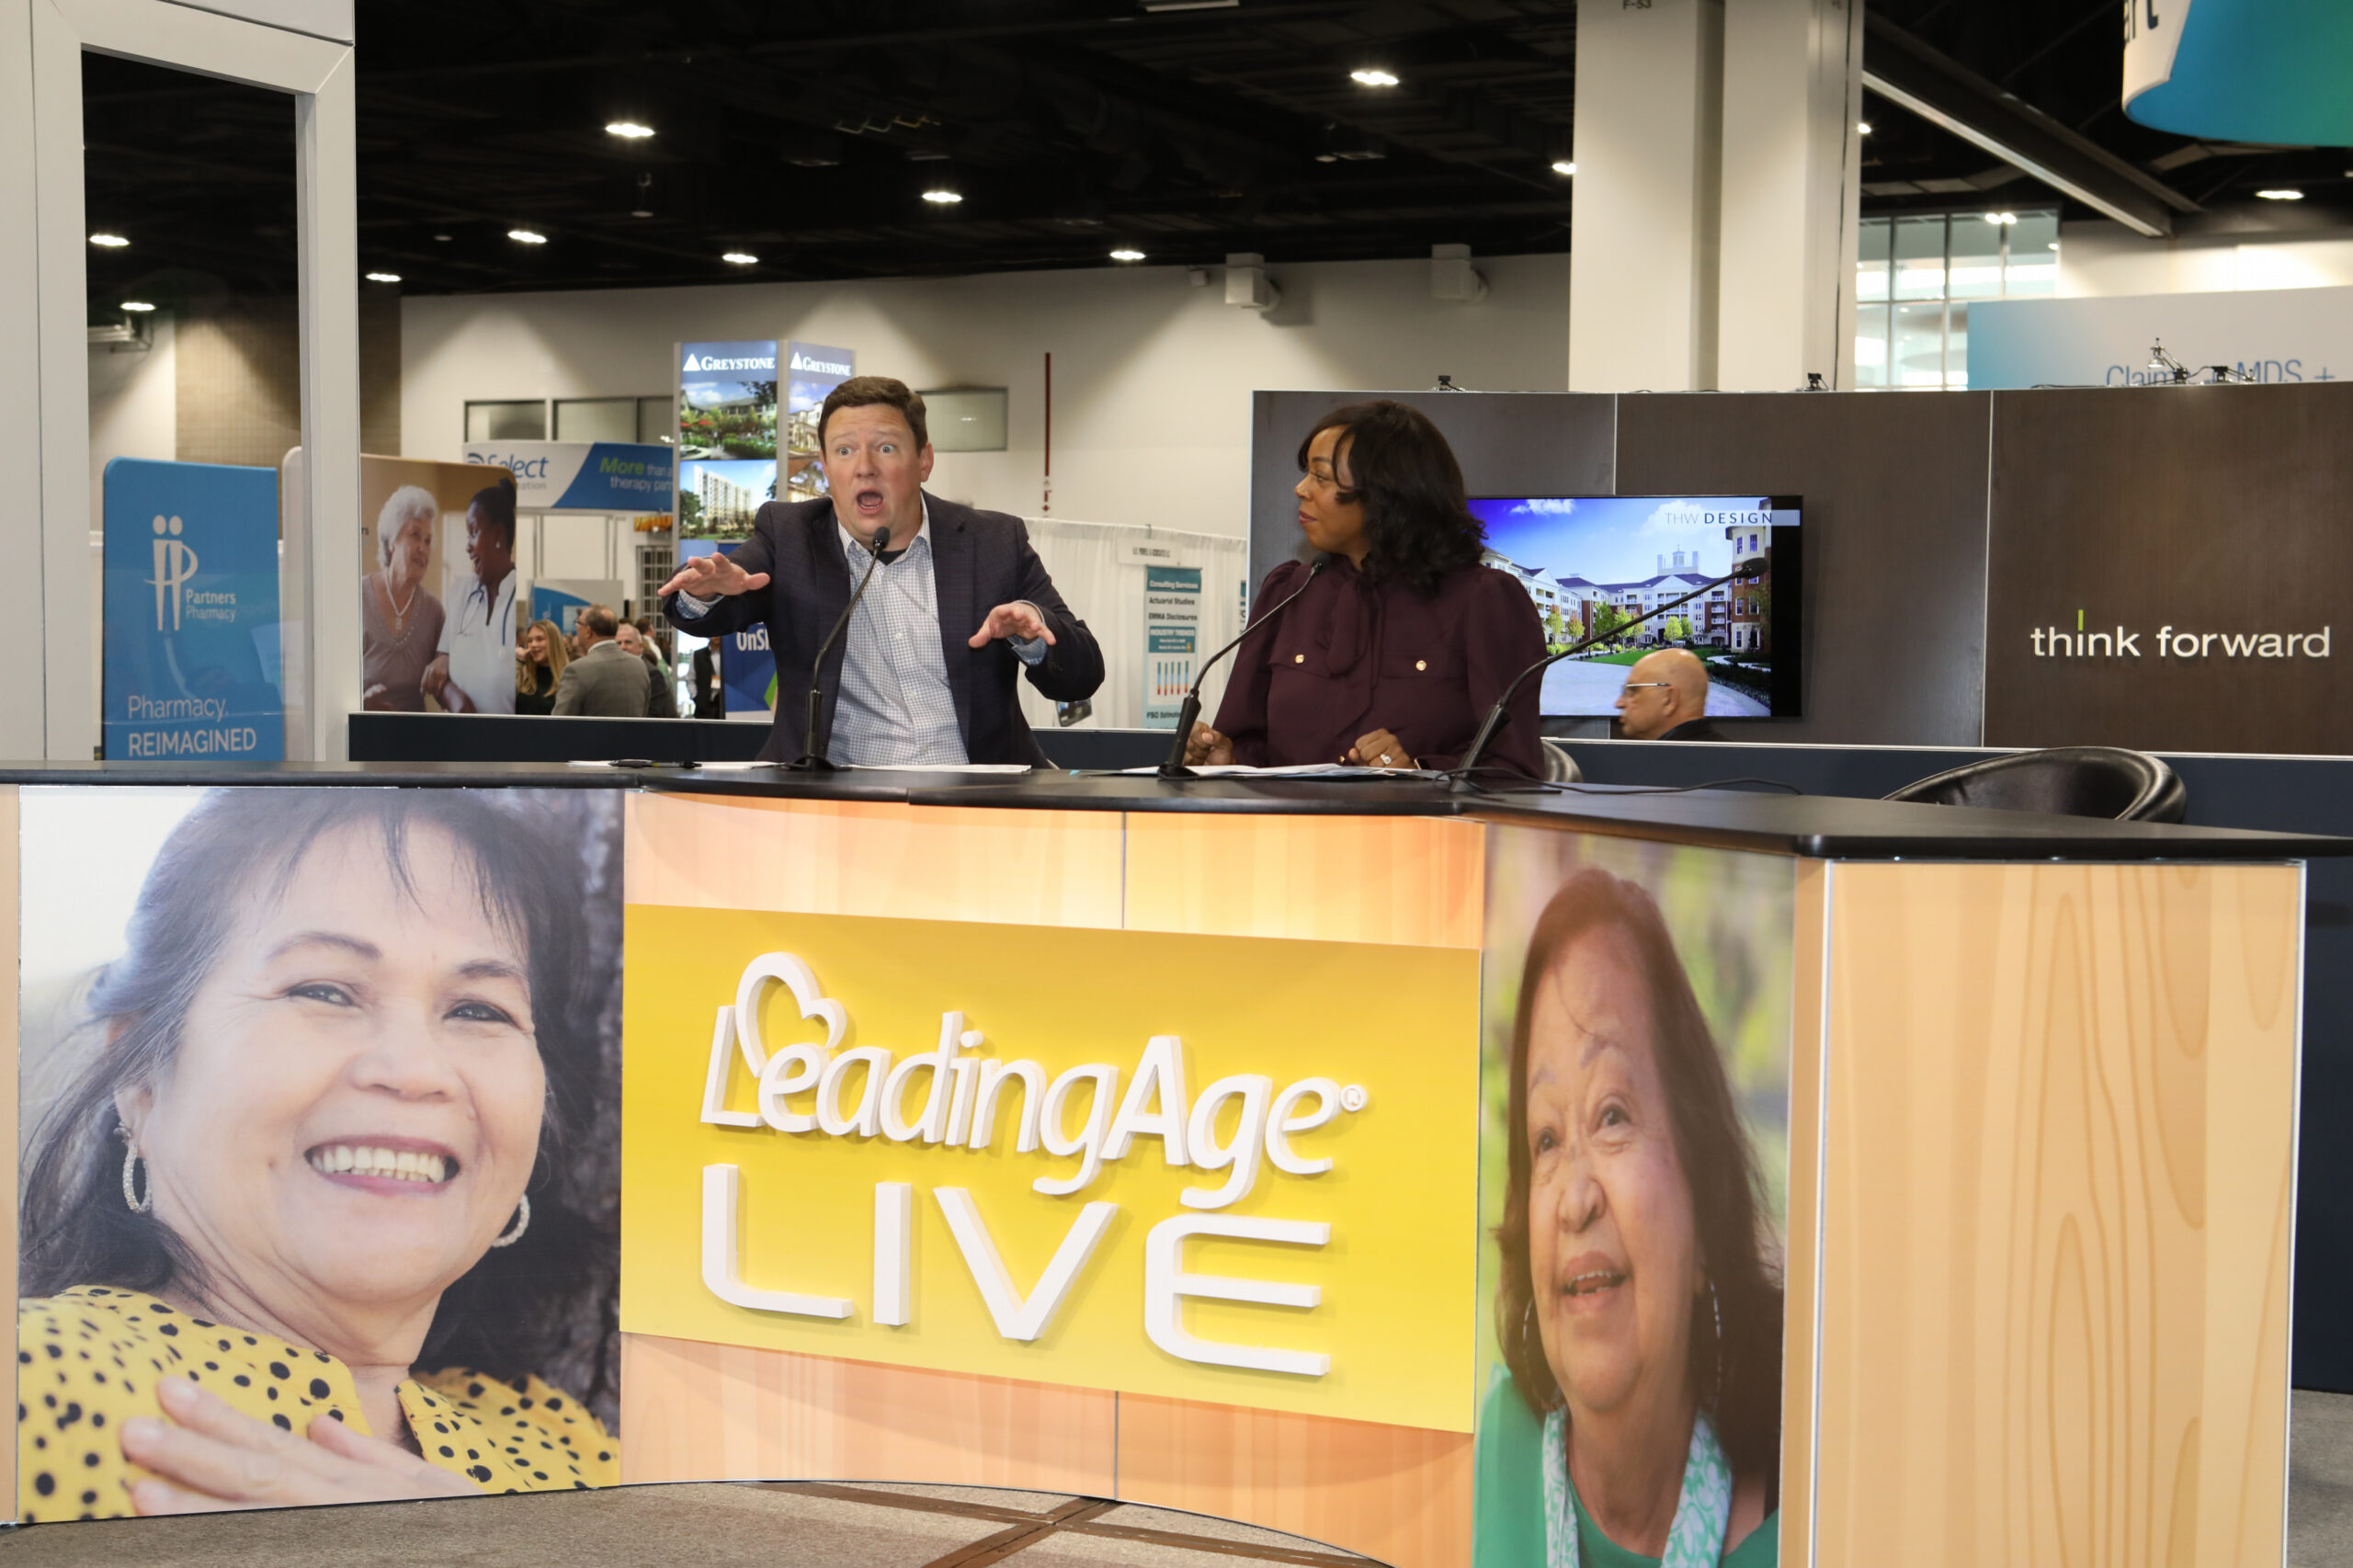 LeadingAge LIVE at the 2022 Annual Meeting + EXPO